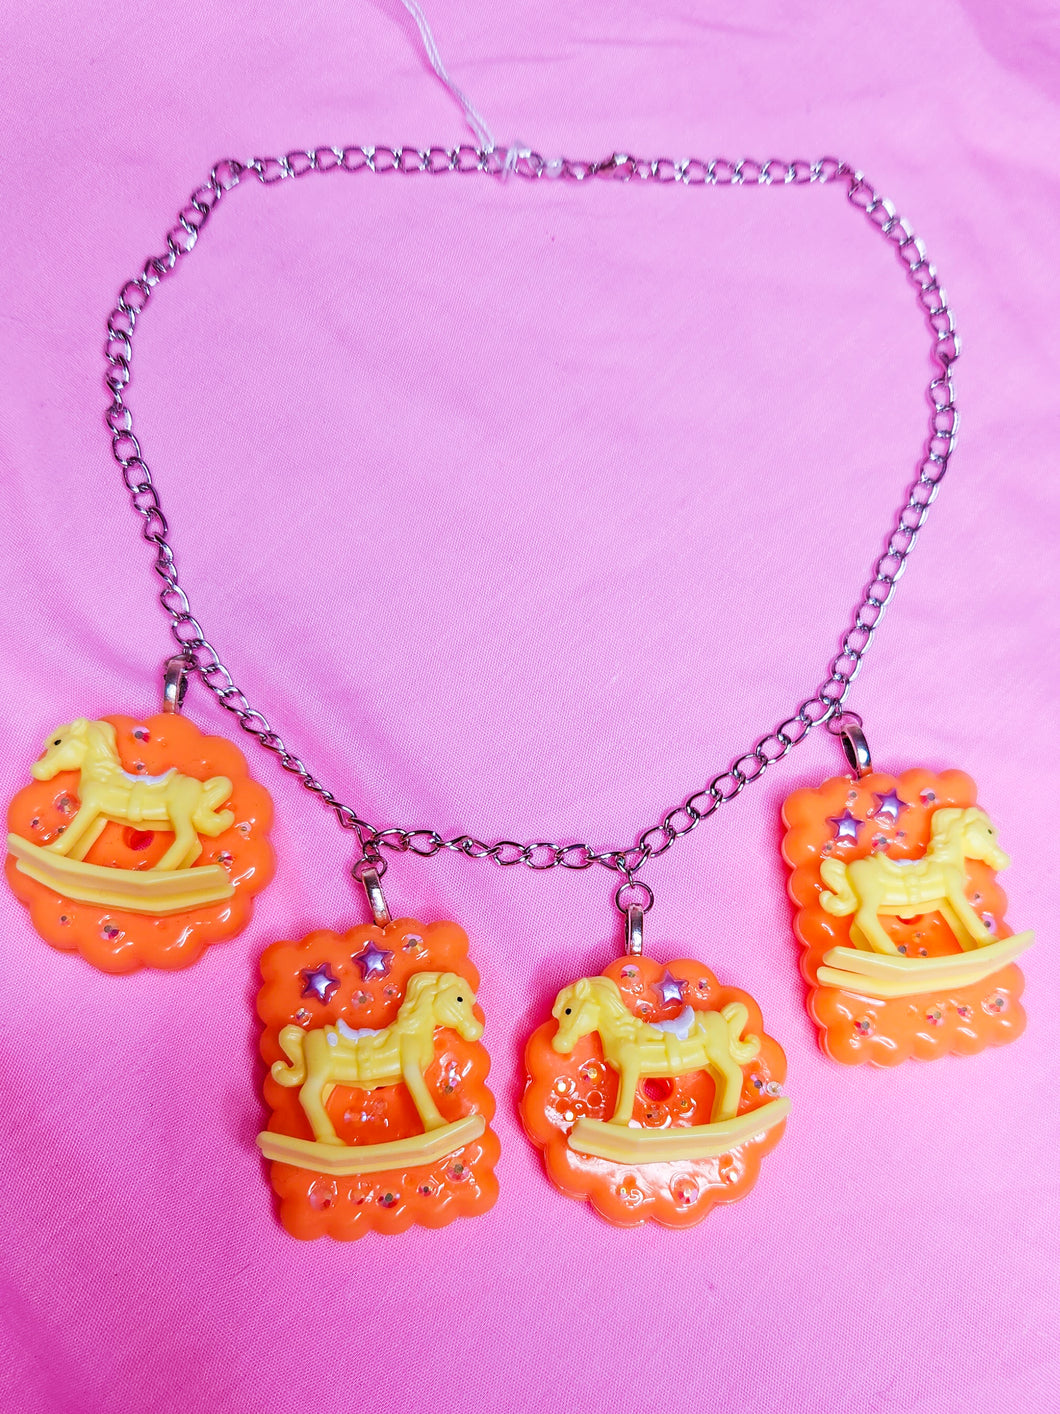 silver chain necklace with orange cracker biscuit charms with yellow rocking horses and rhinestones